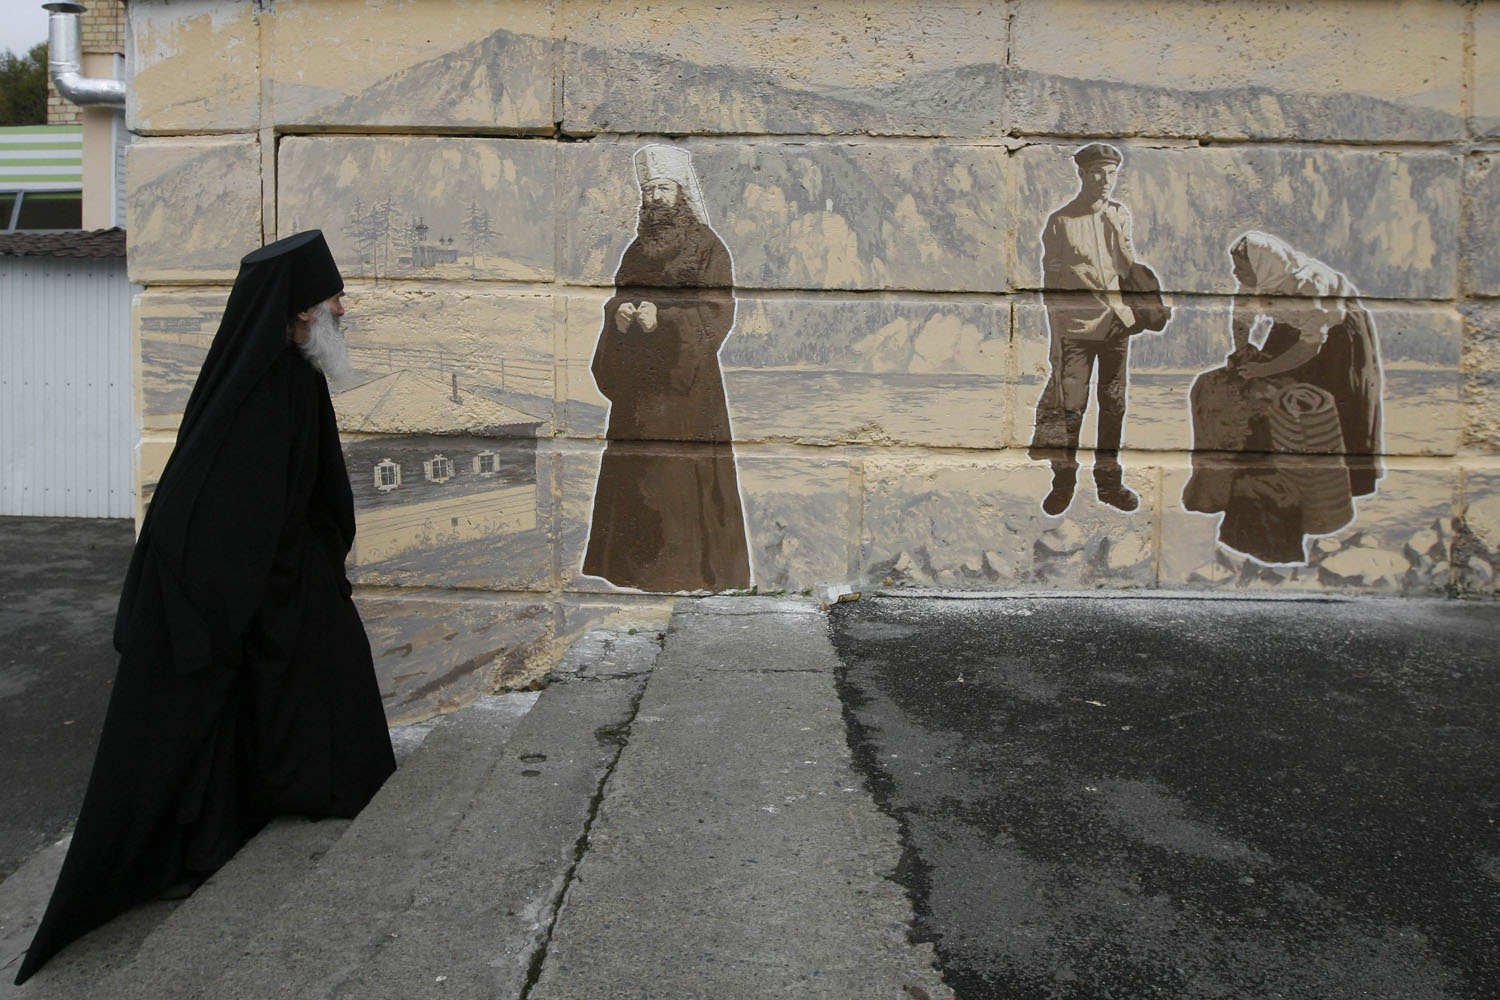 Orthodox monk Father Ioakim, 74, looks at a street graffiti, which displays Siberian characters of the 19th century including an Russian Orthodox monk, in Divnogorsk town